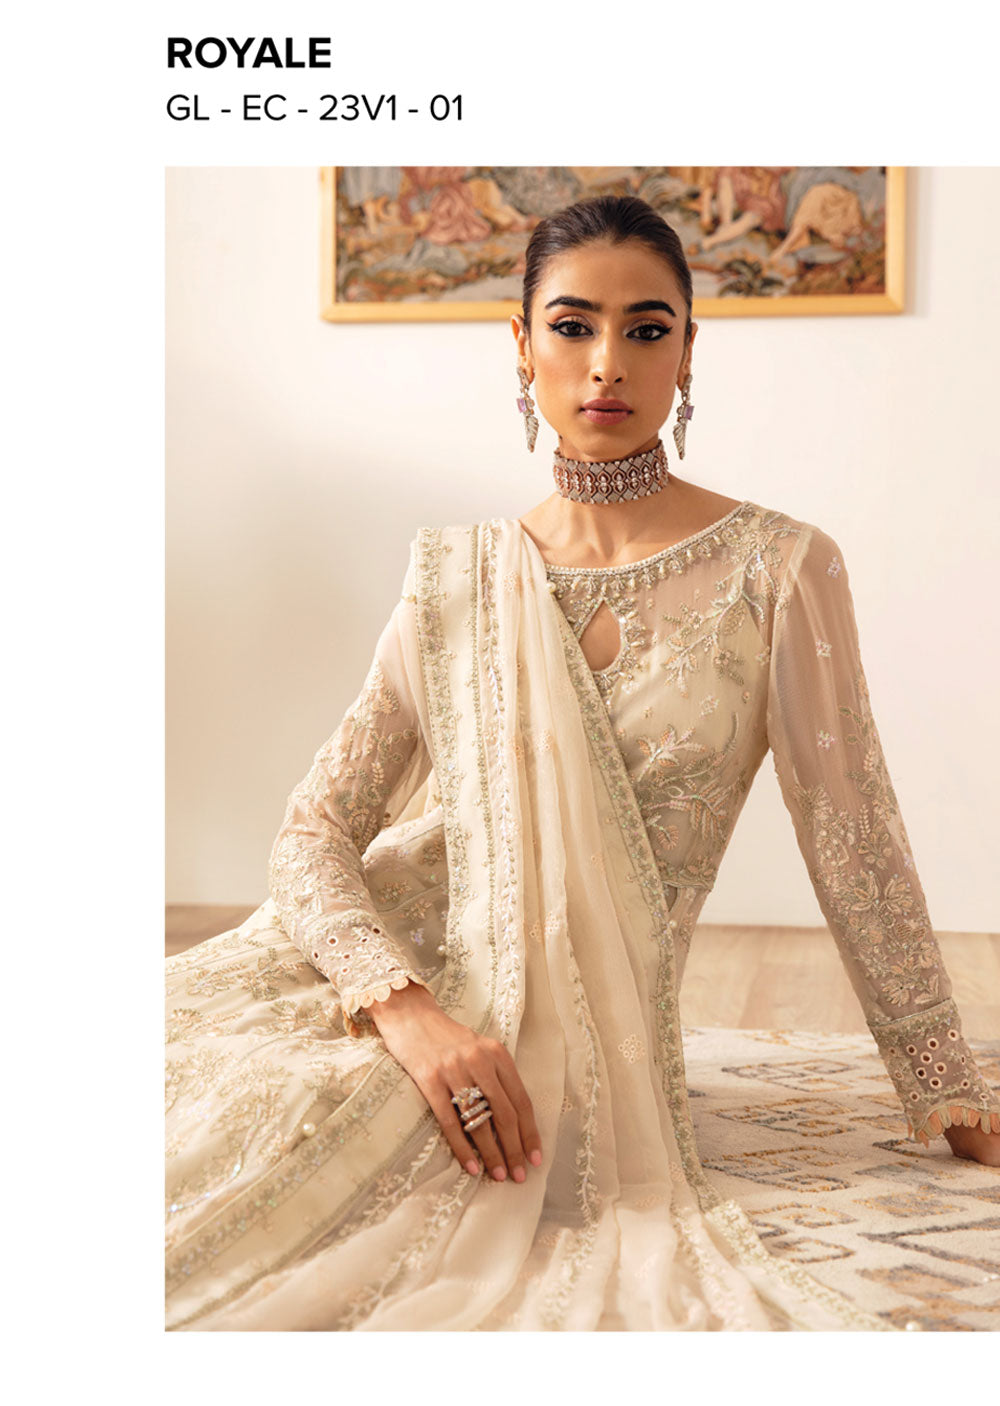 GLCC-01 - Royale - Readymade - Gulaal Embroidered Chiffon Collection 2023 - Memsaab Online